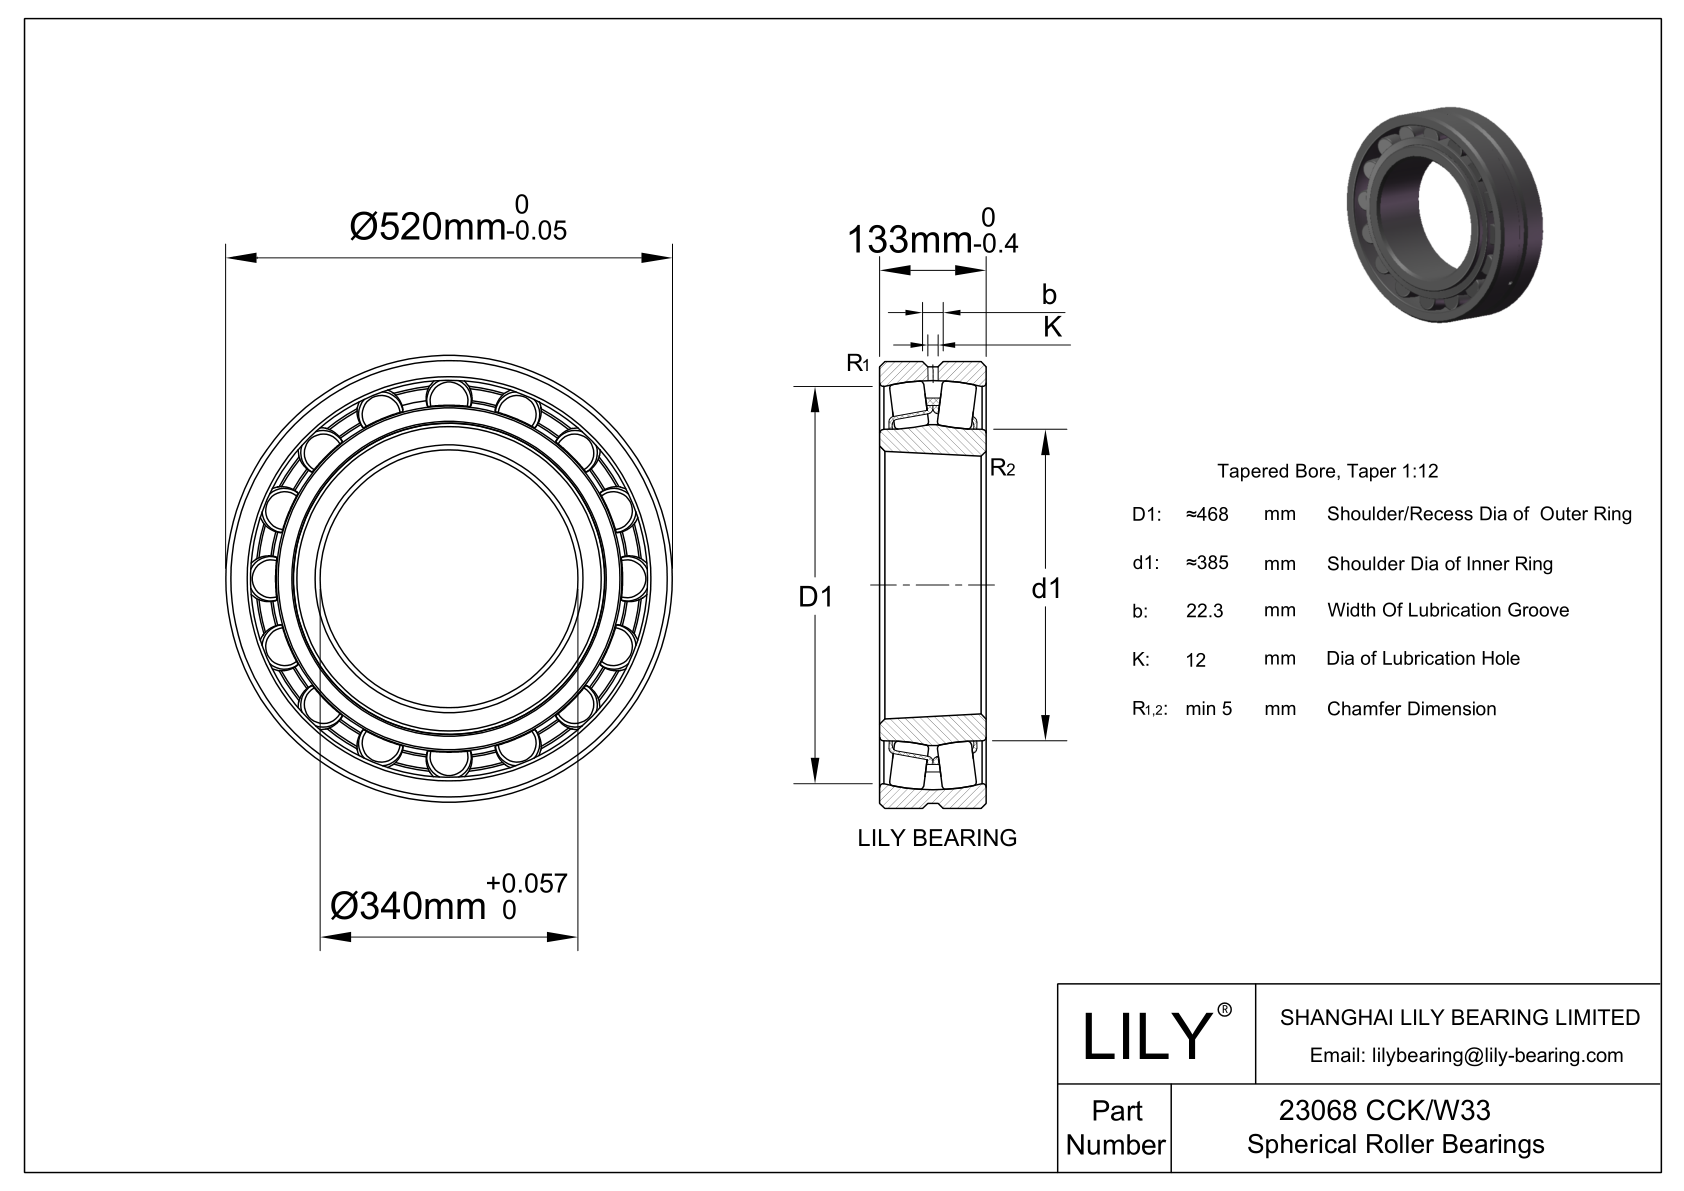 23068 CCK/W33 Double Row Spherical Roller Bearing cad drawing